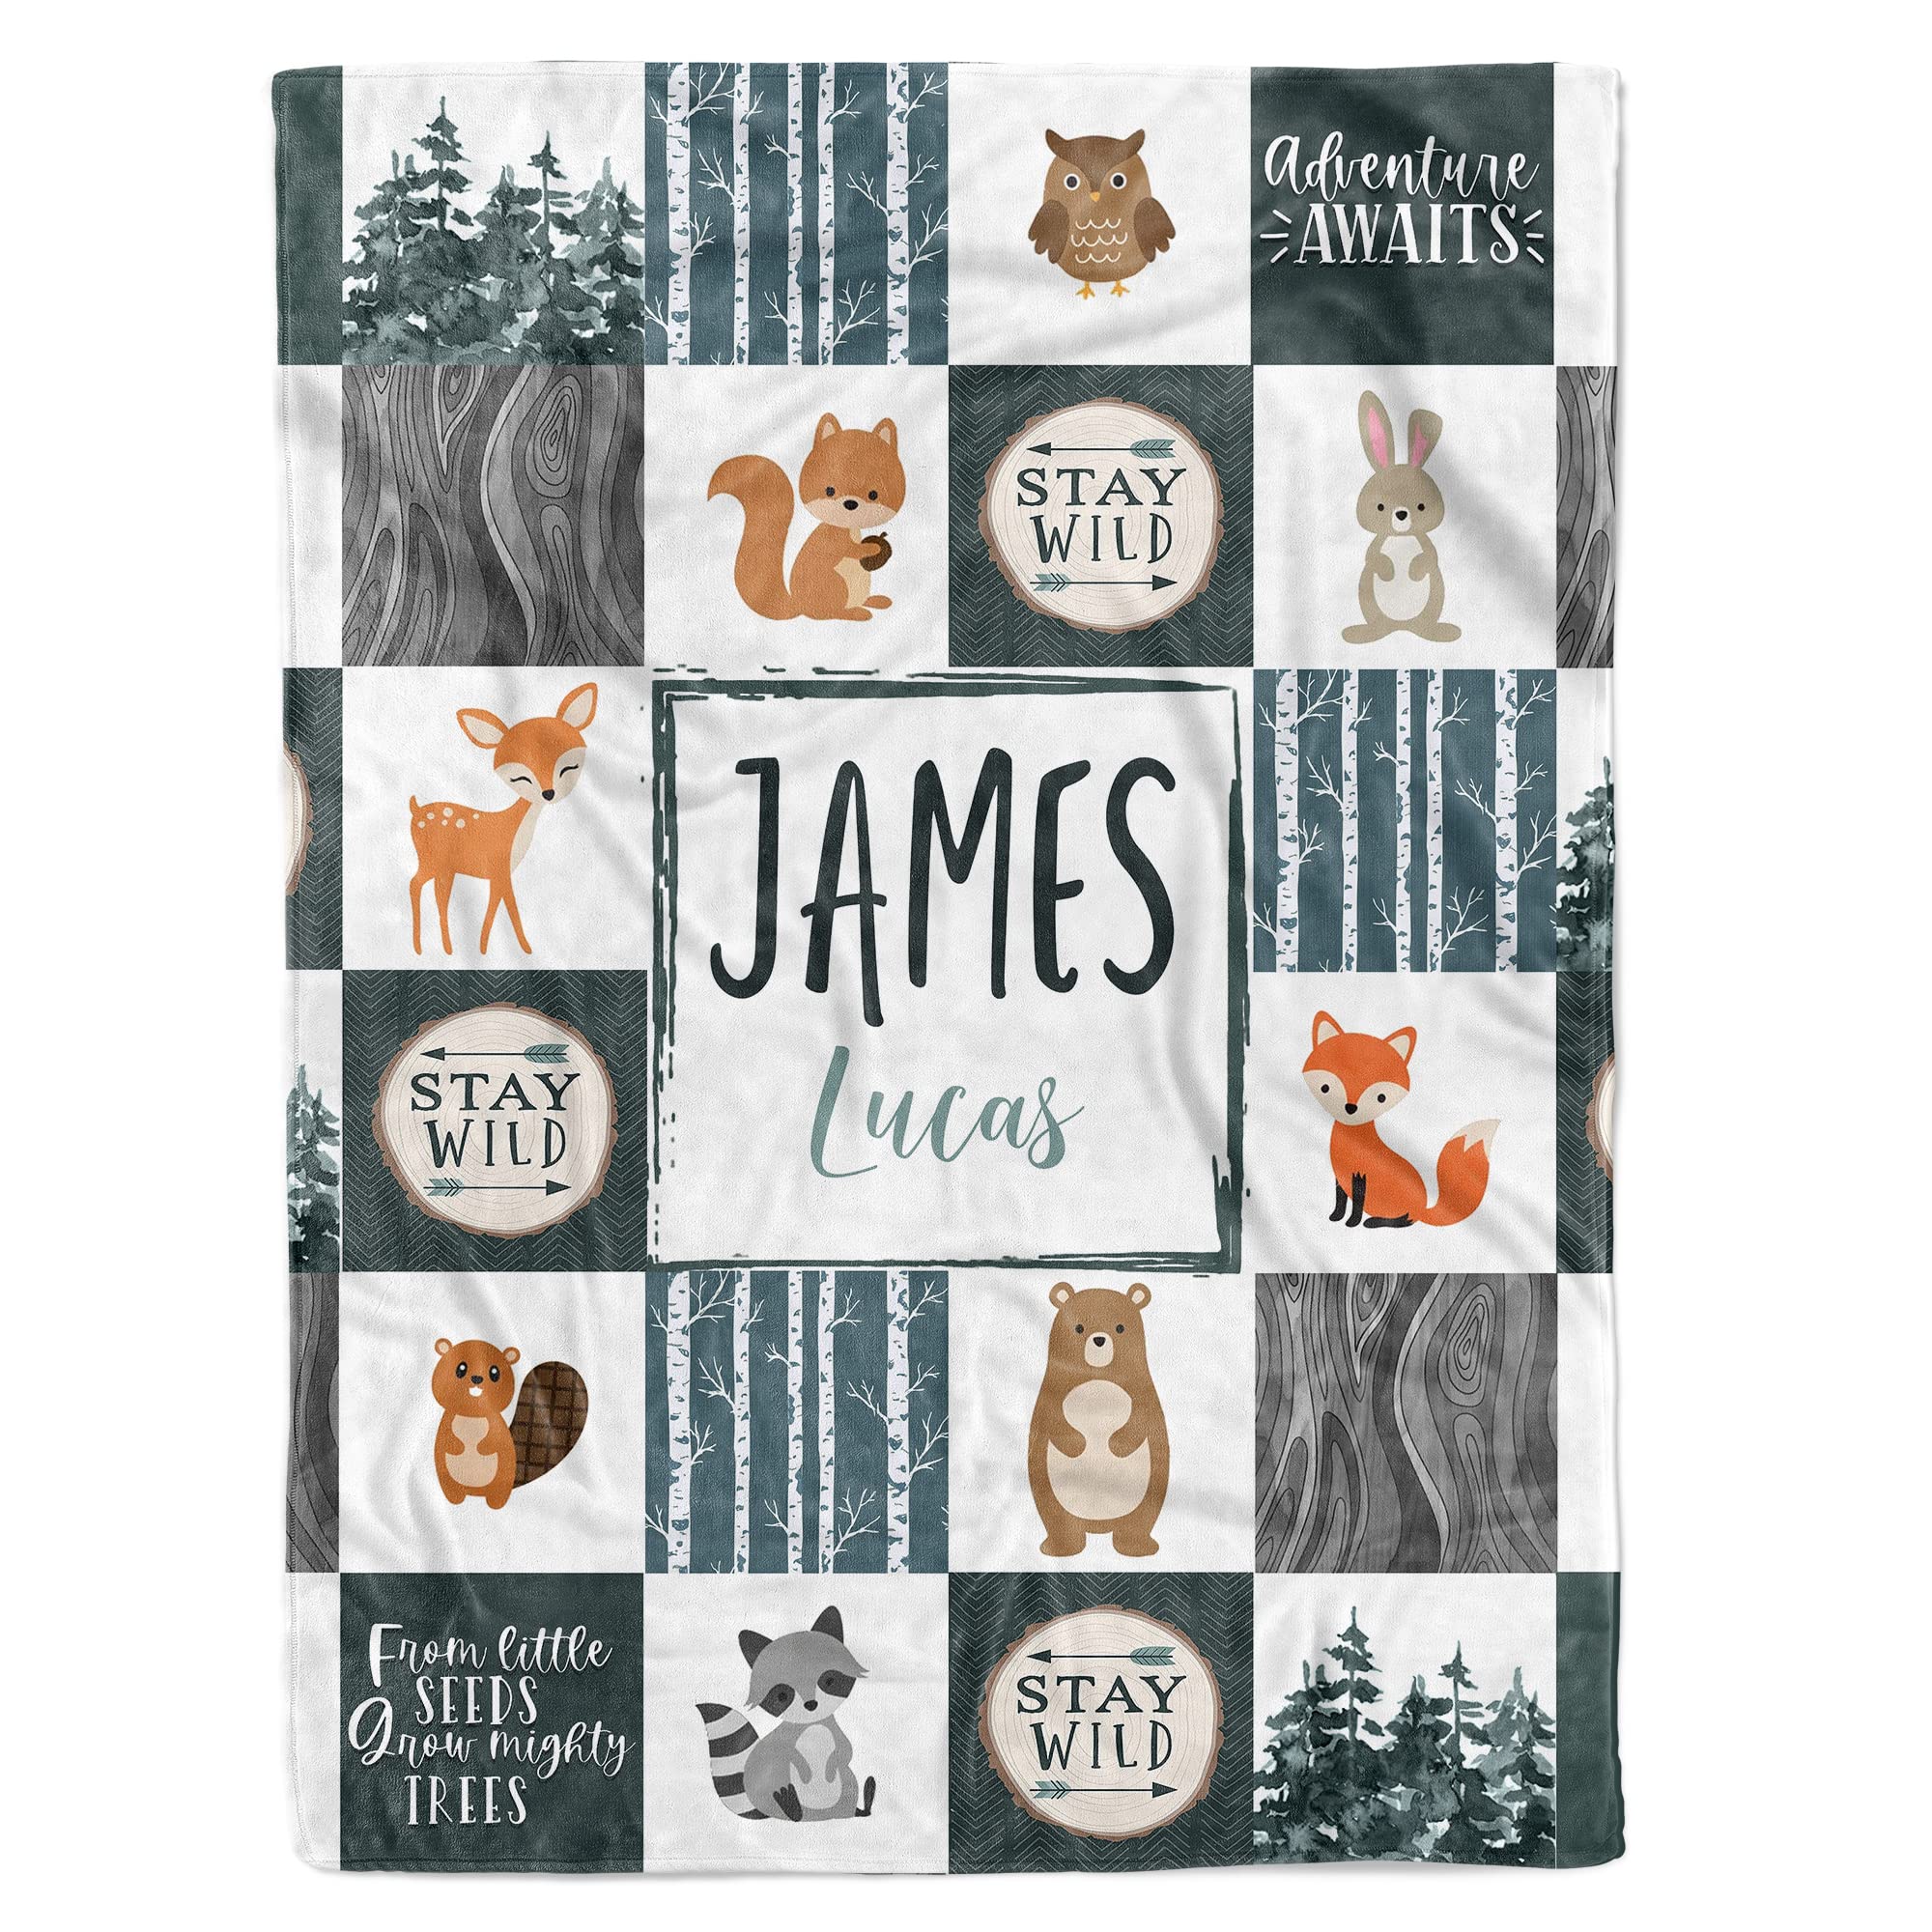 MDPrints Woodland Personalized Baby Blankets - Custom Baby Blanket with Name for Boys - Soft Plush Fleece (Woodland 214b)